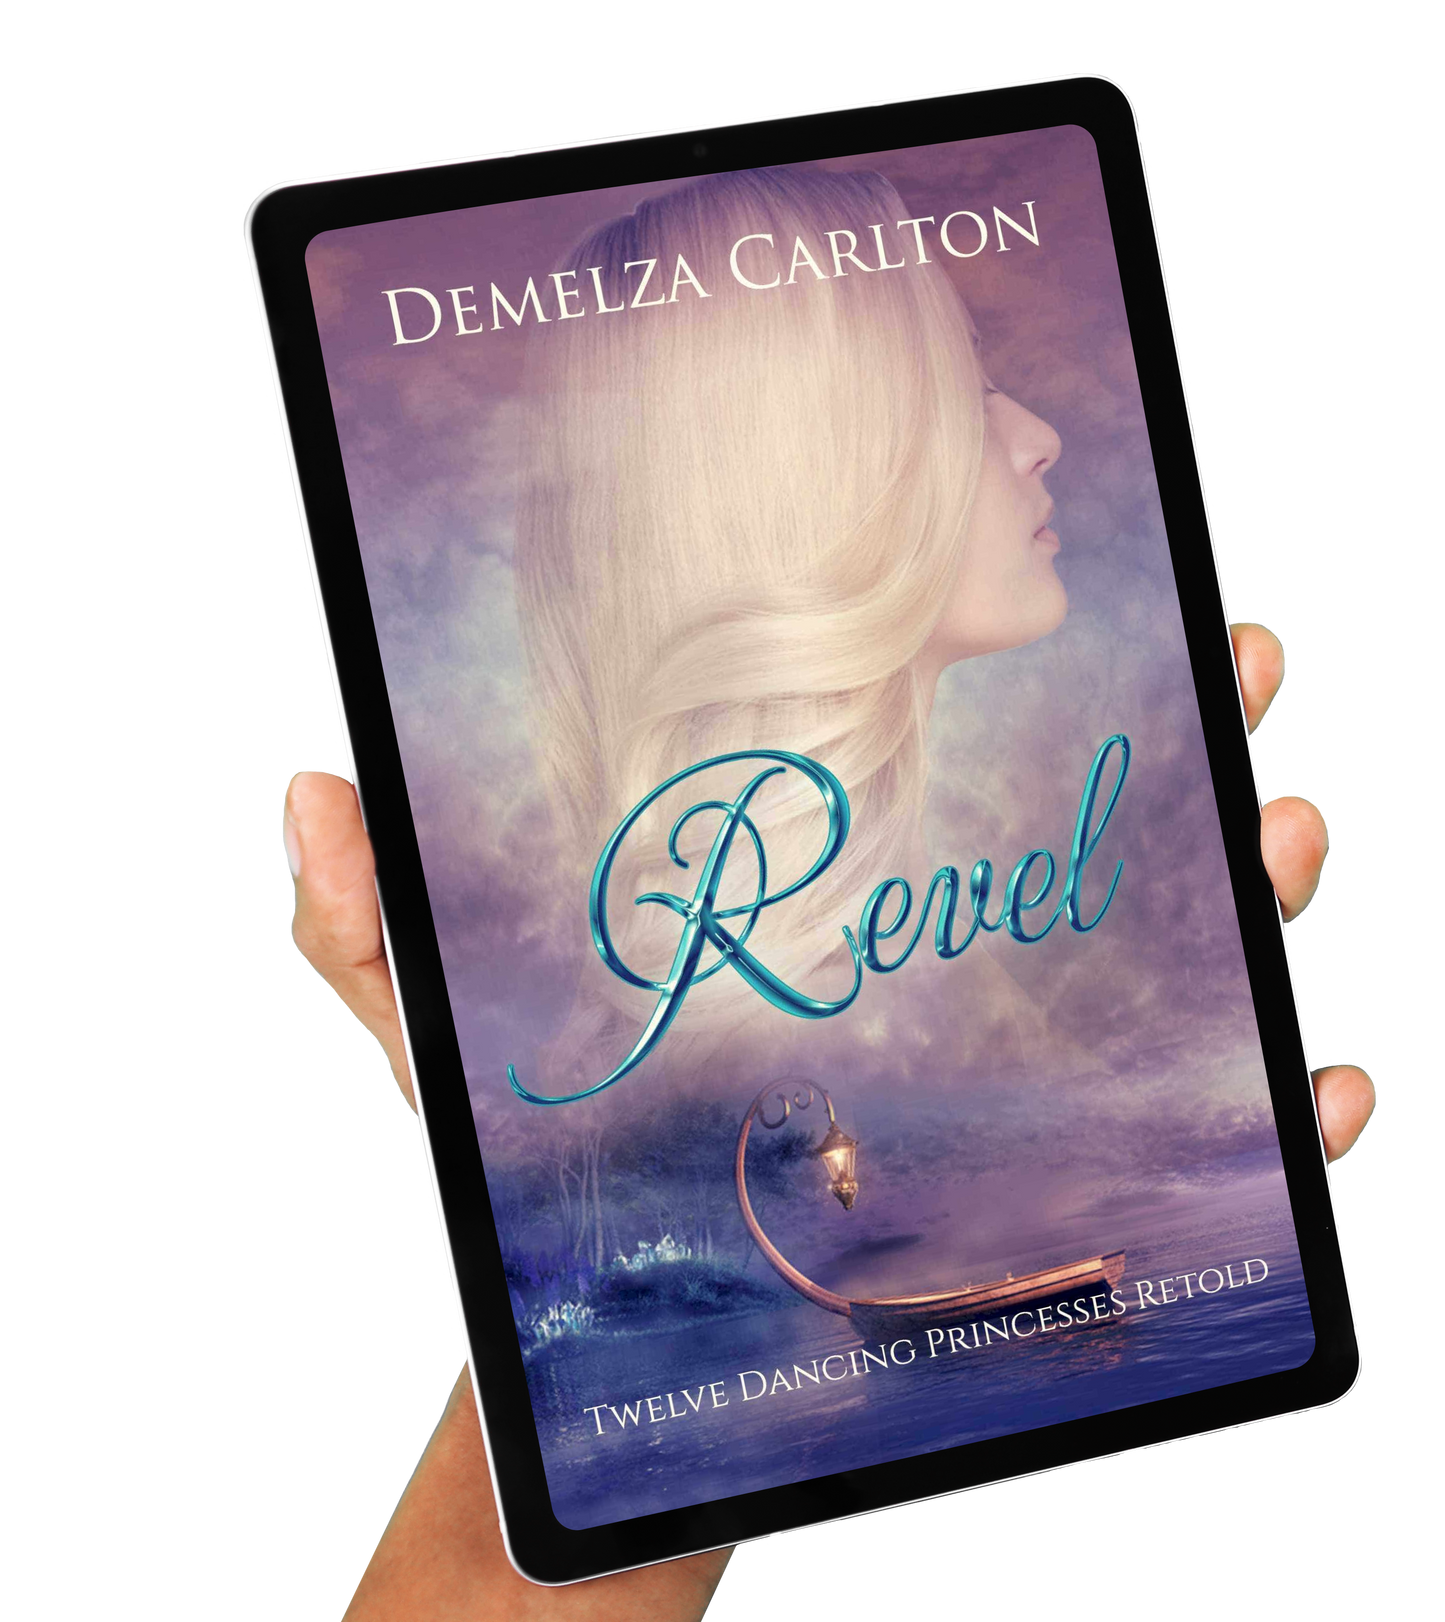 Revel: Twelve Dancing Princeses Retold Book 4 in the Romance a Medieval Fairytale series by USA Today Bestselling Author Demelza Carlton ebook